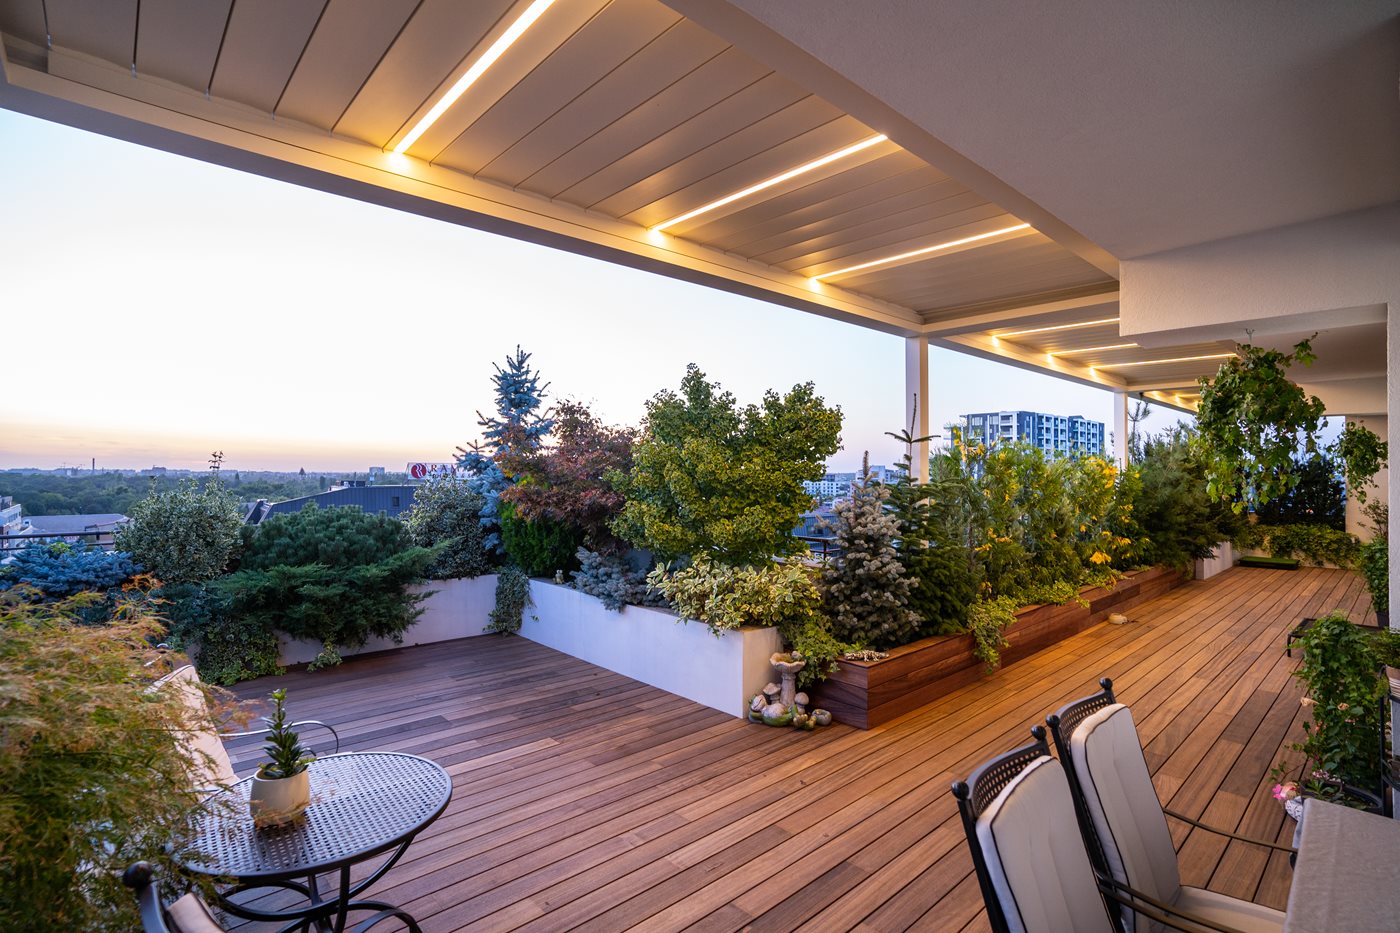 Lighting for outdoor structures: discover the solutions